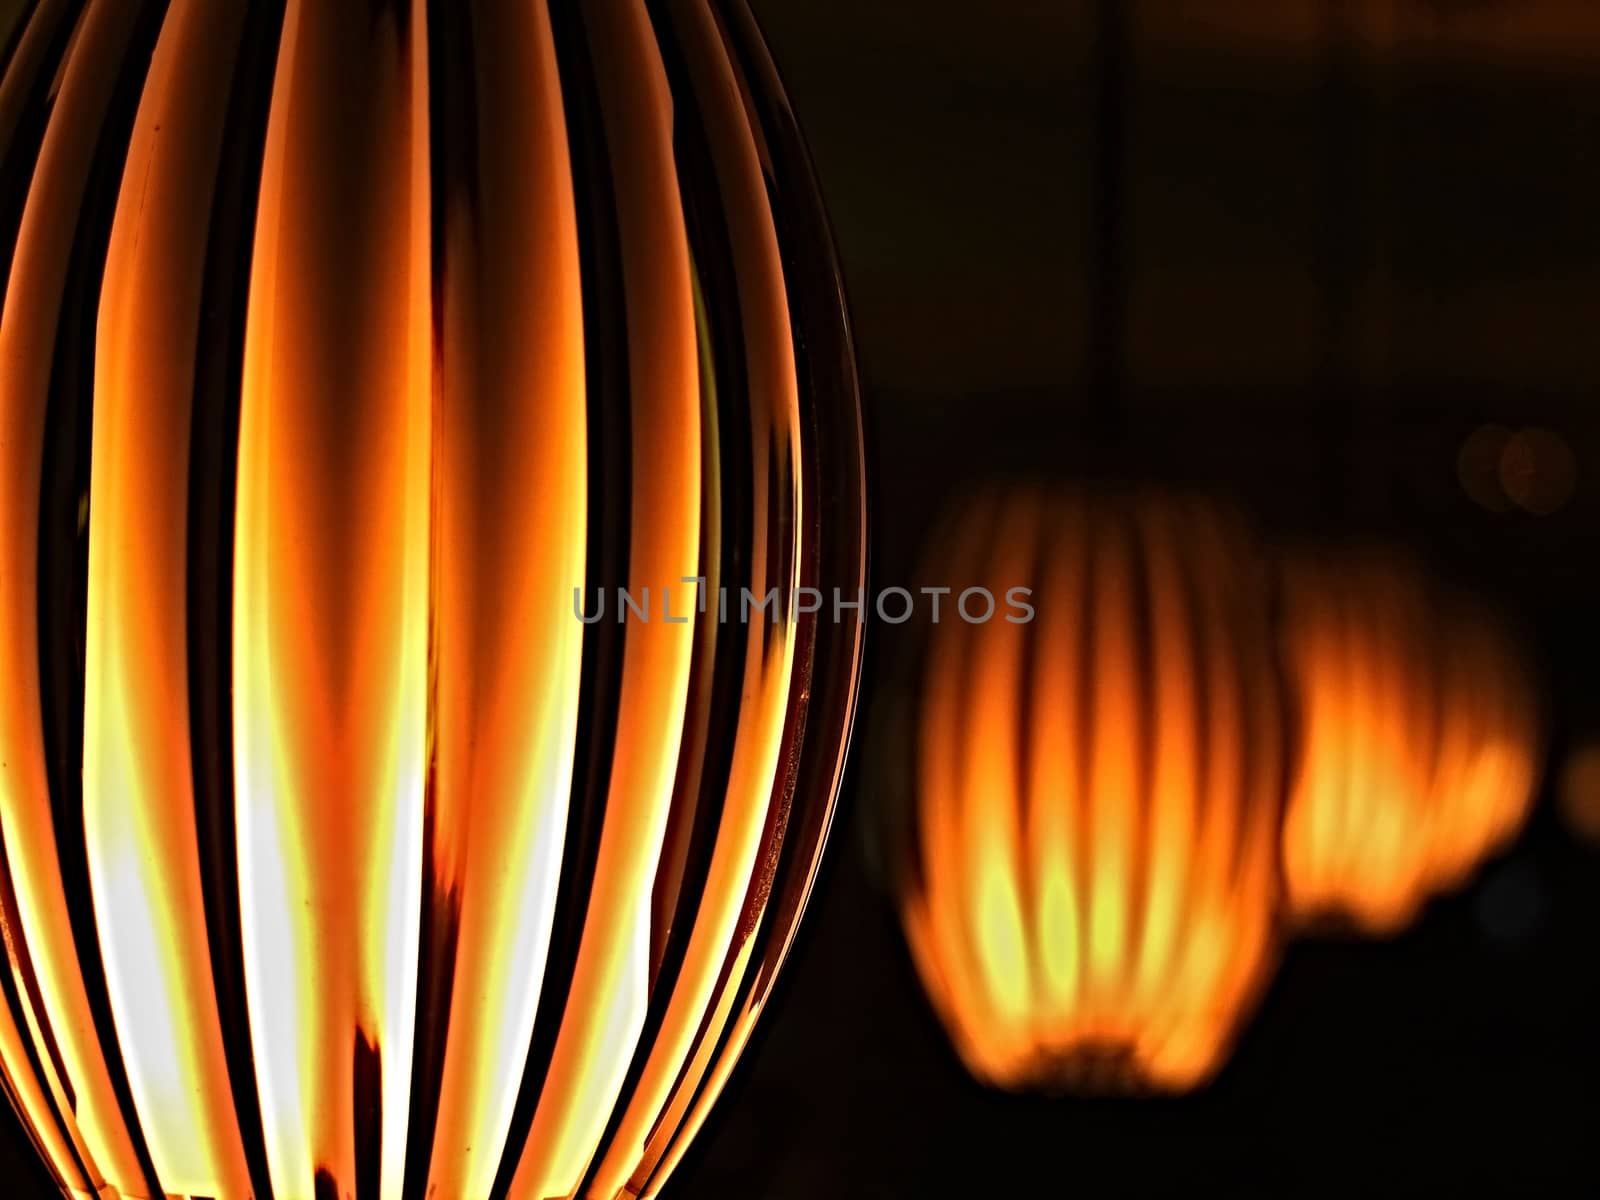 Hanging lamps with ambient light